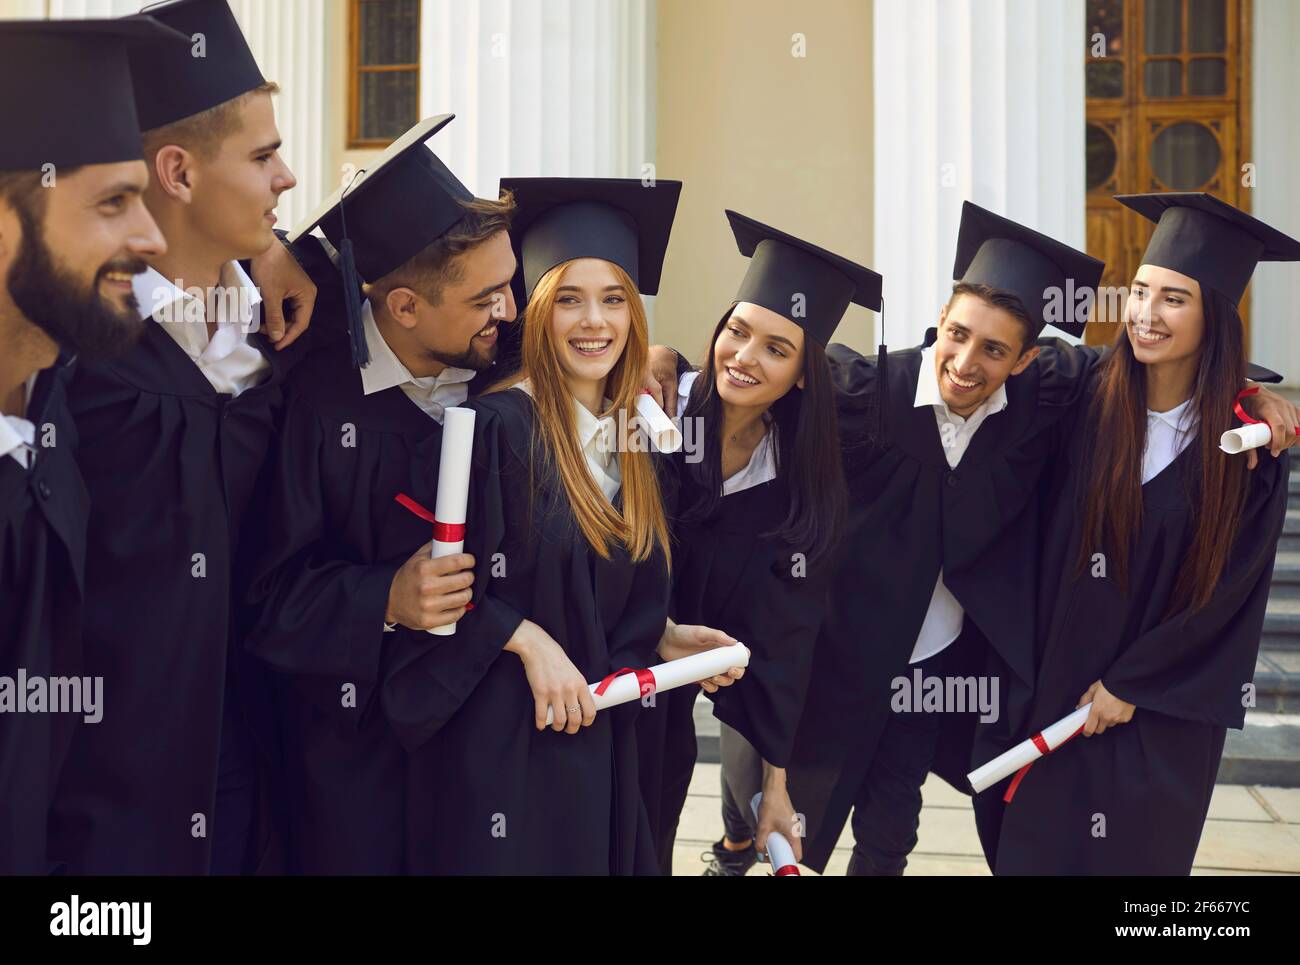 Smiling students in black gowns and square caps with diplomas having fun after graduation ceremony Stock Photo